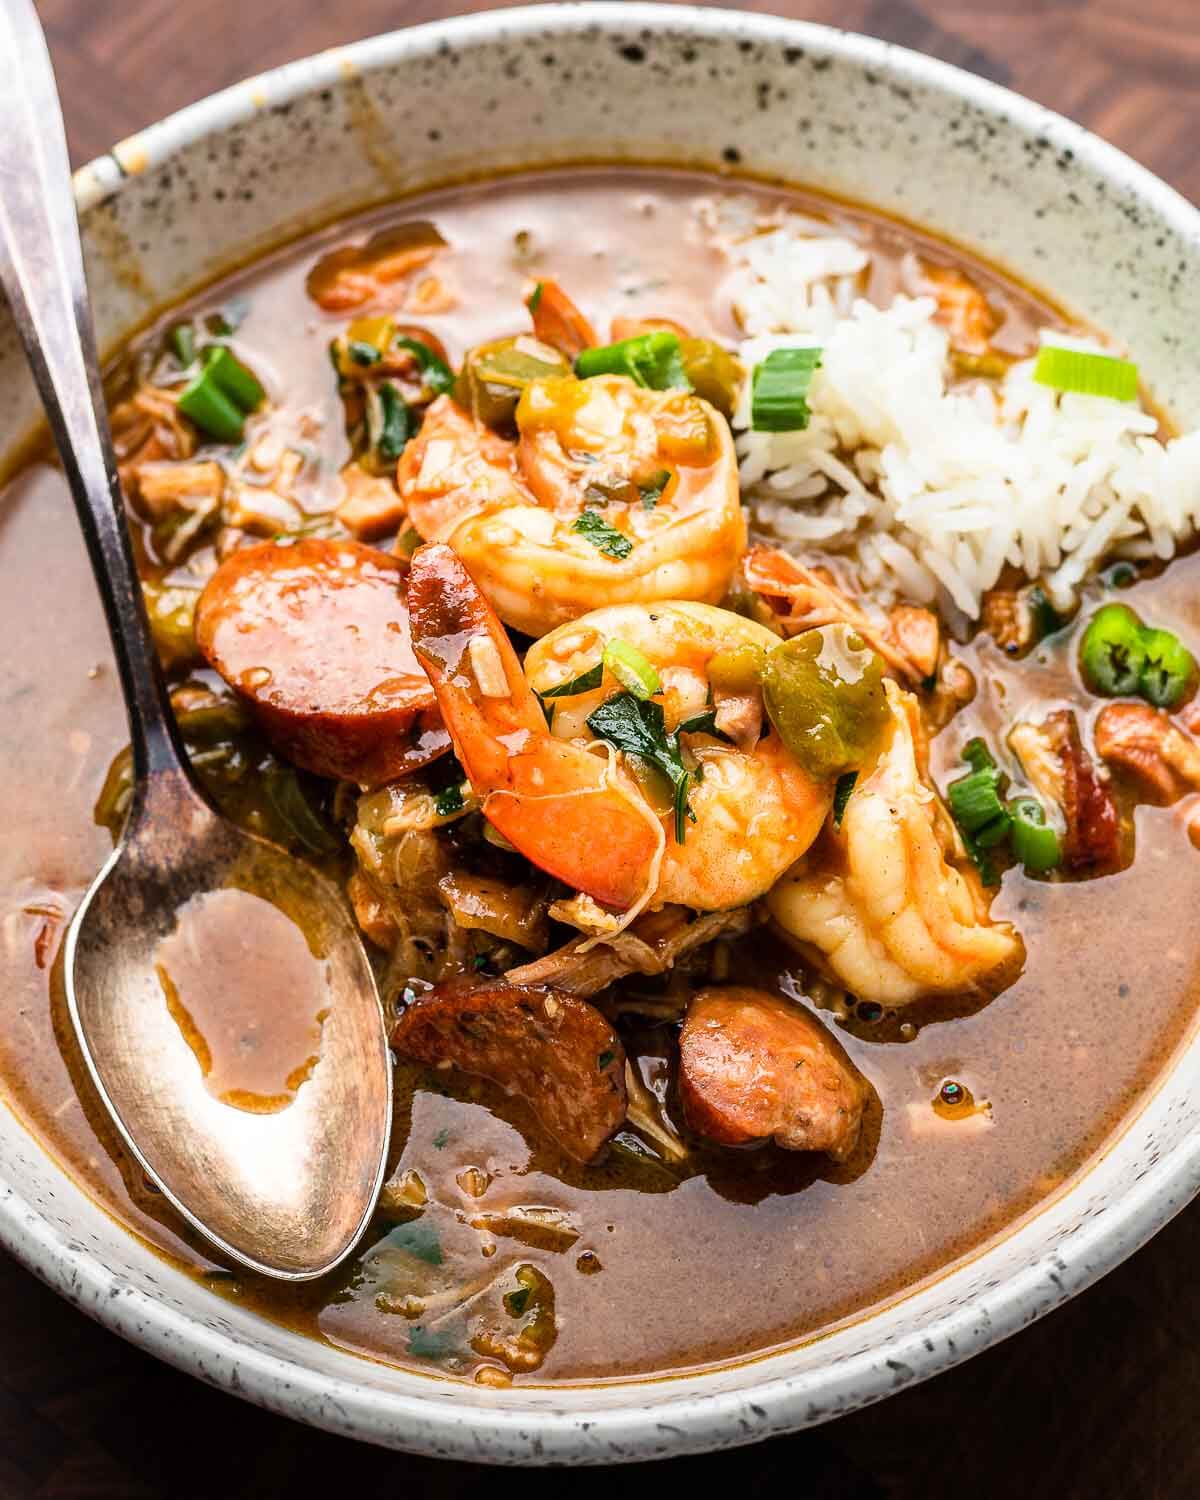 Large white bowl with chicken, sausage, and shrimp gumbo.